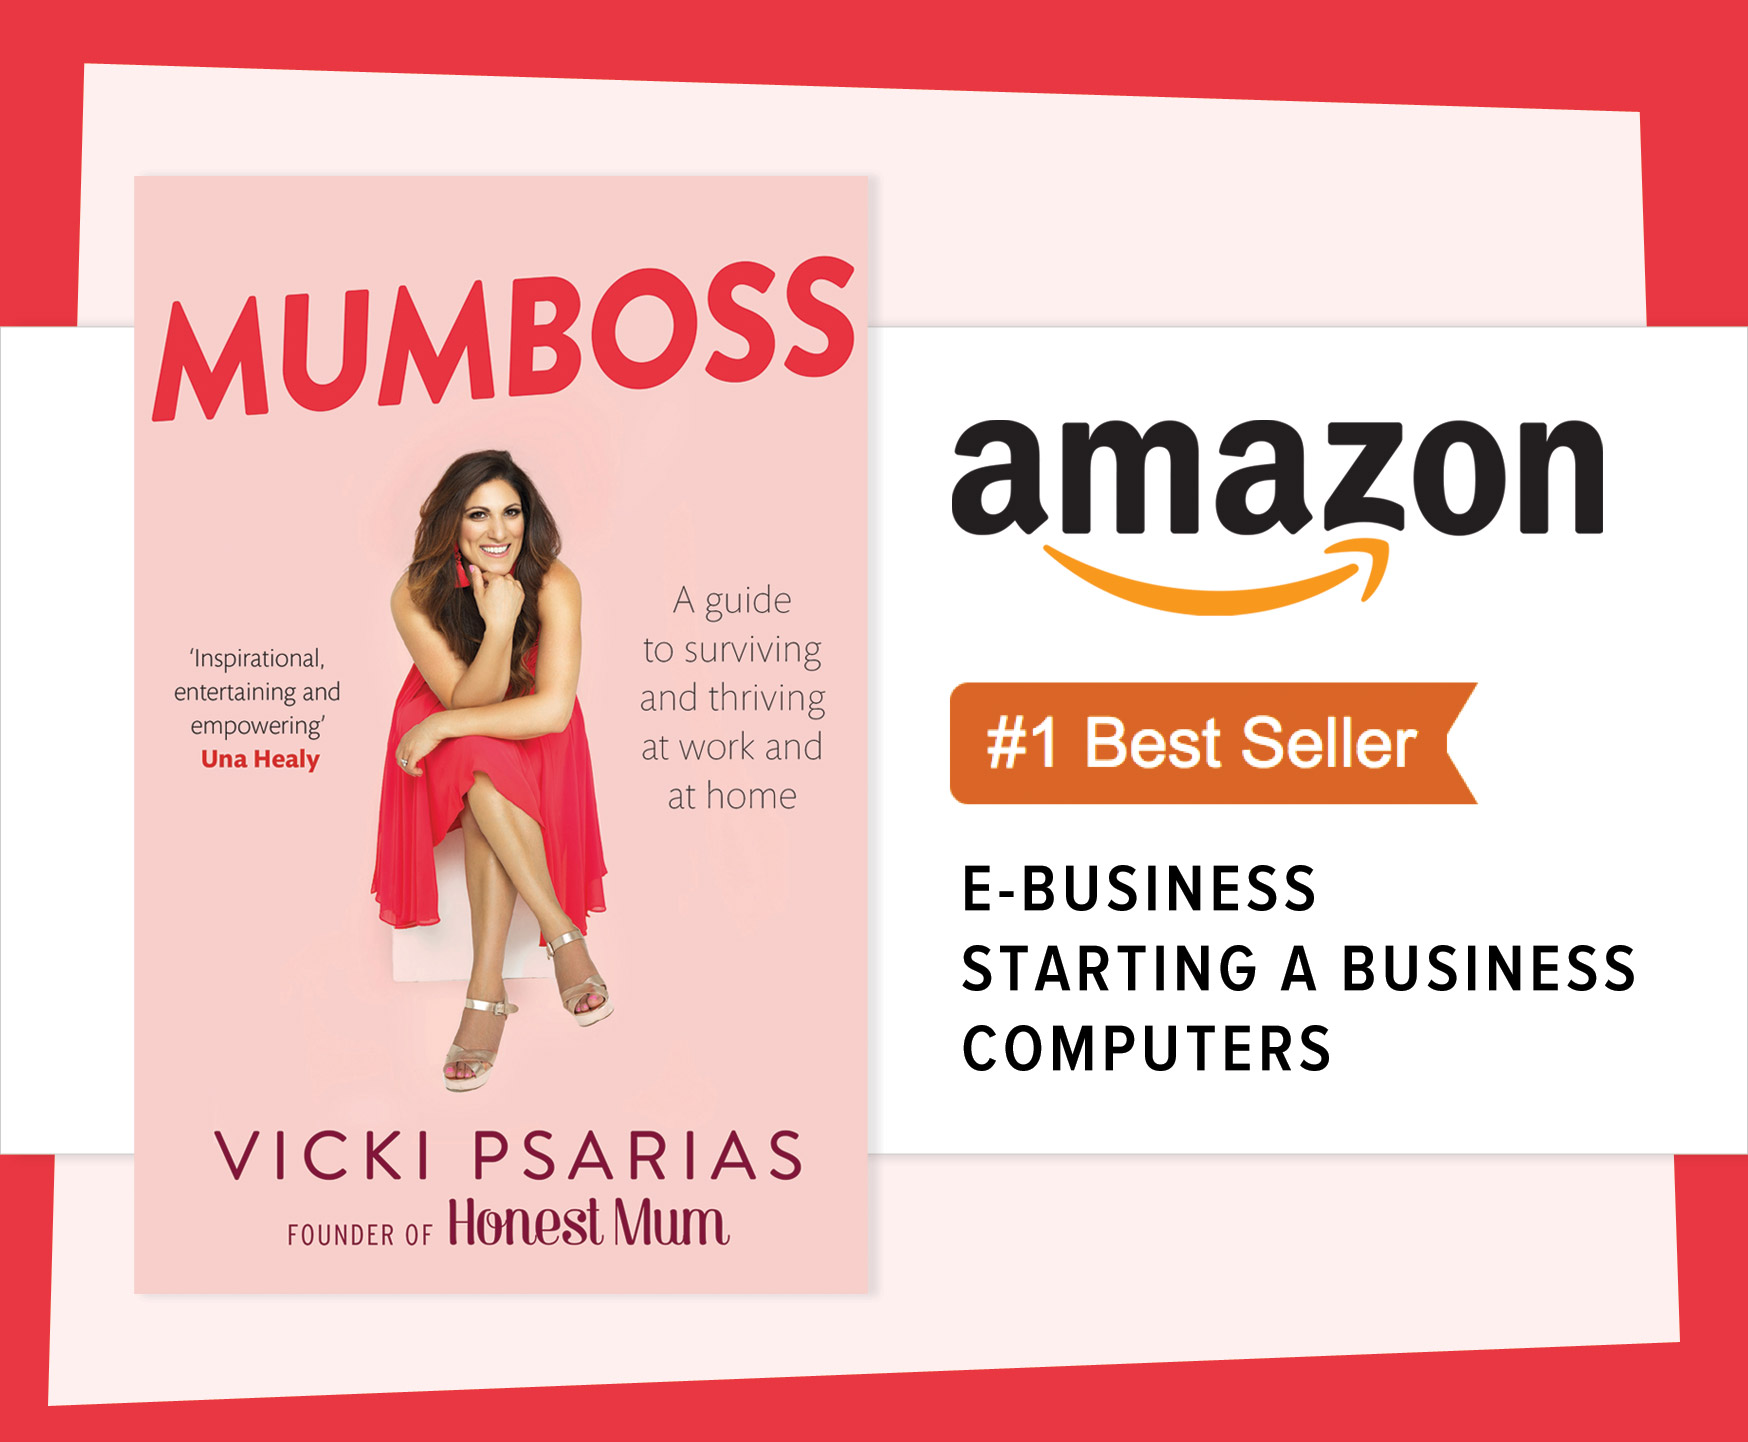 #1 Amazon bestseller in: E-Business, Starting a Business, Computers